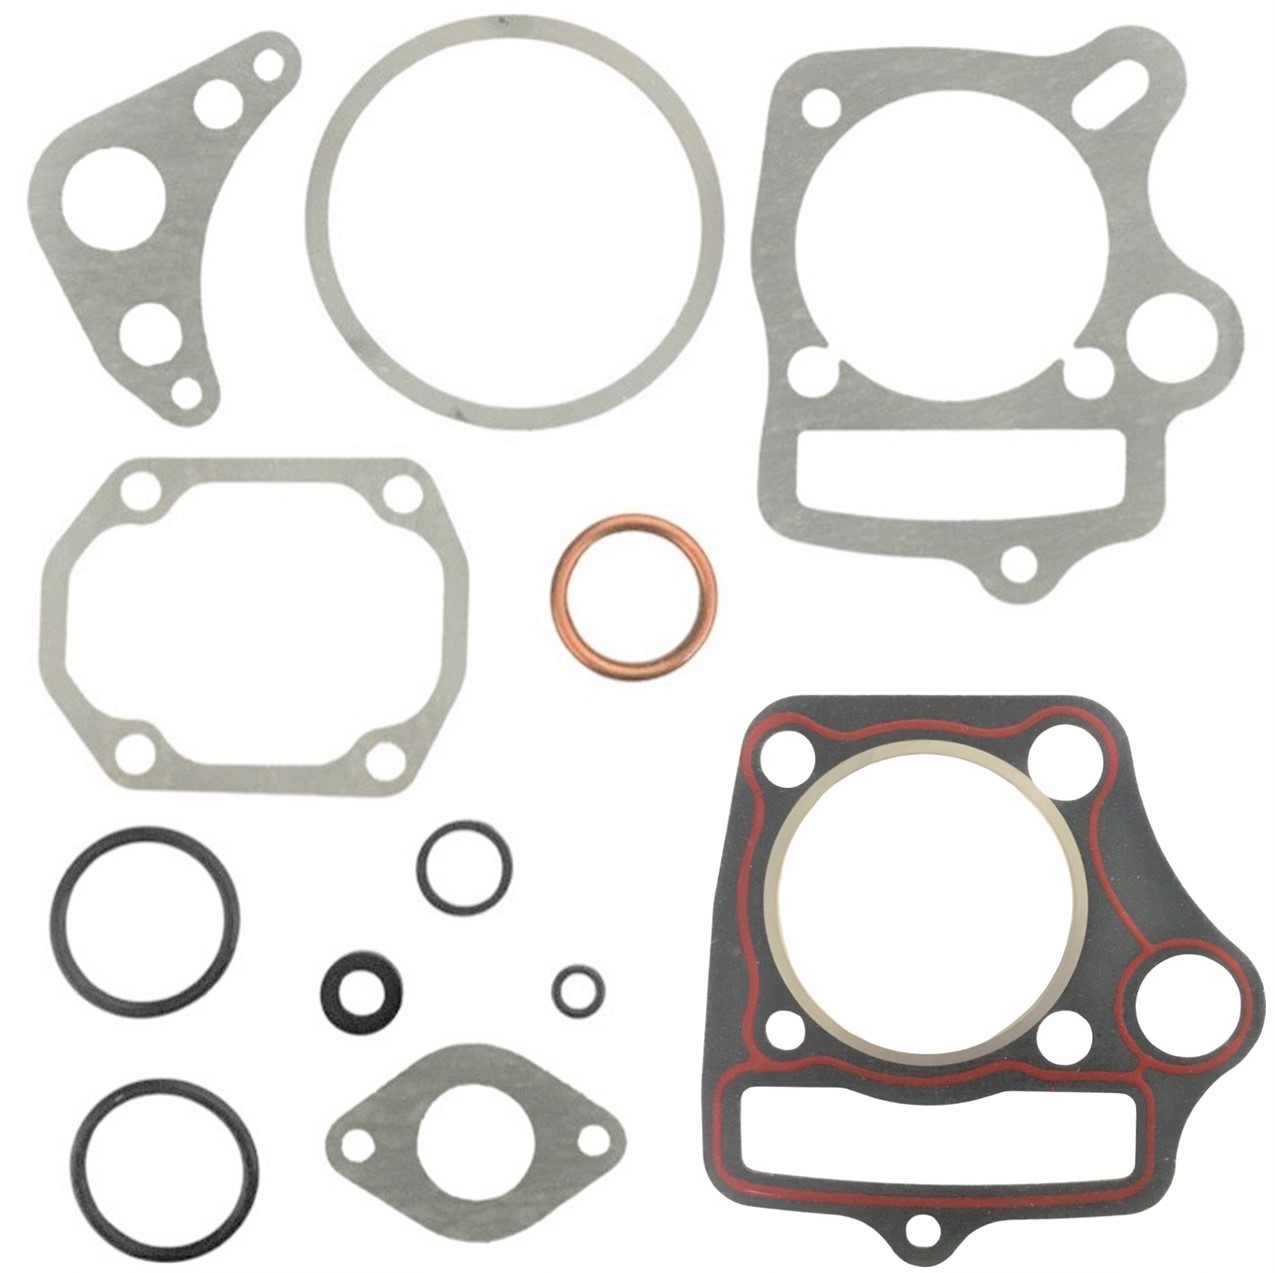 Top End Gasket Set 125cc 54mm Fits ATVs & DirtBikes with the 125 Honda Copy Engine with 54mm Bore. - Click Image to Close